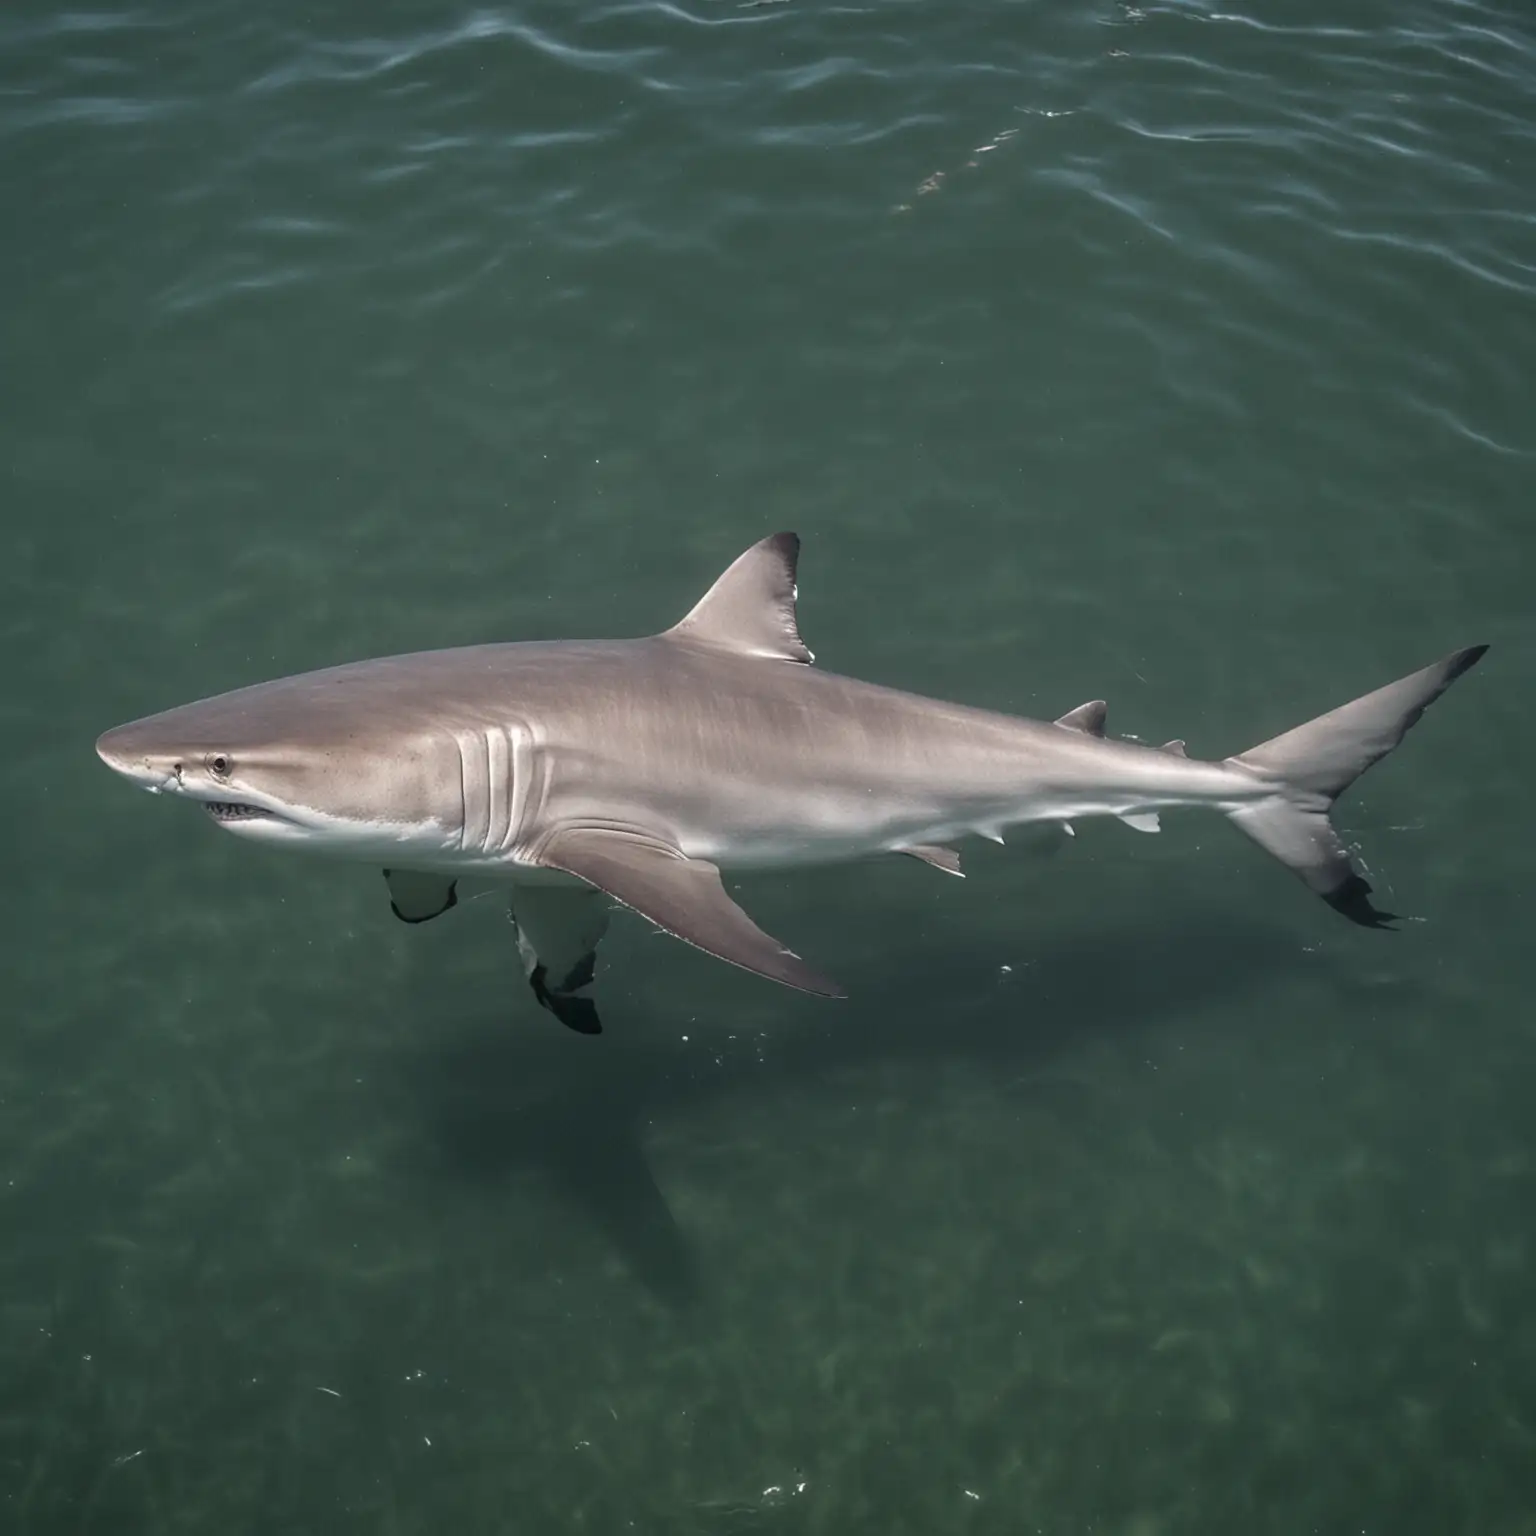 A Shark in a freshwater river